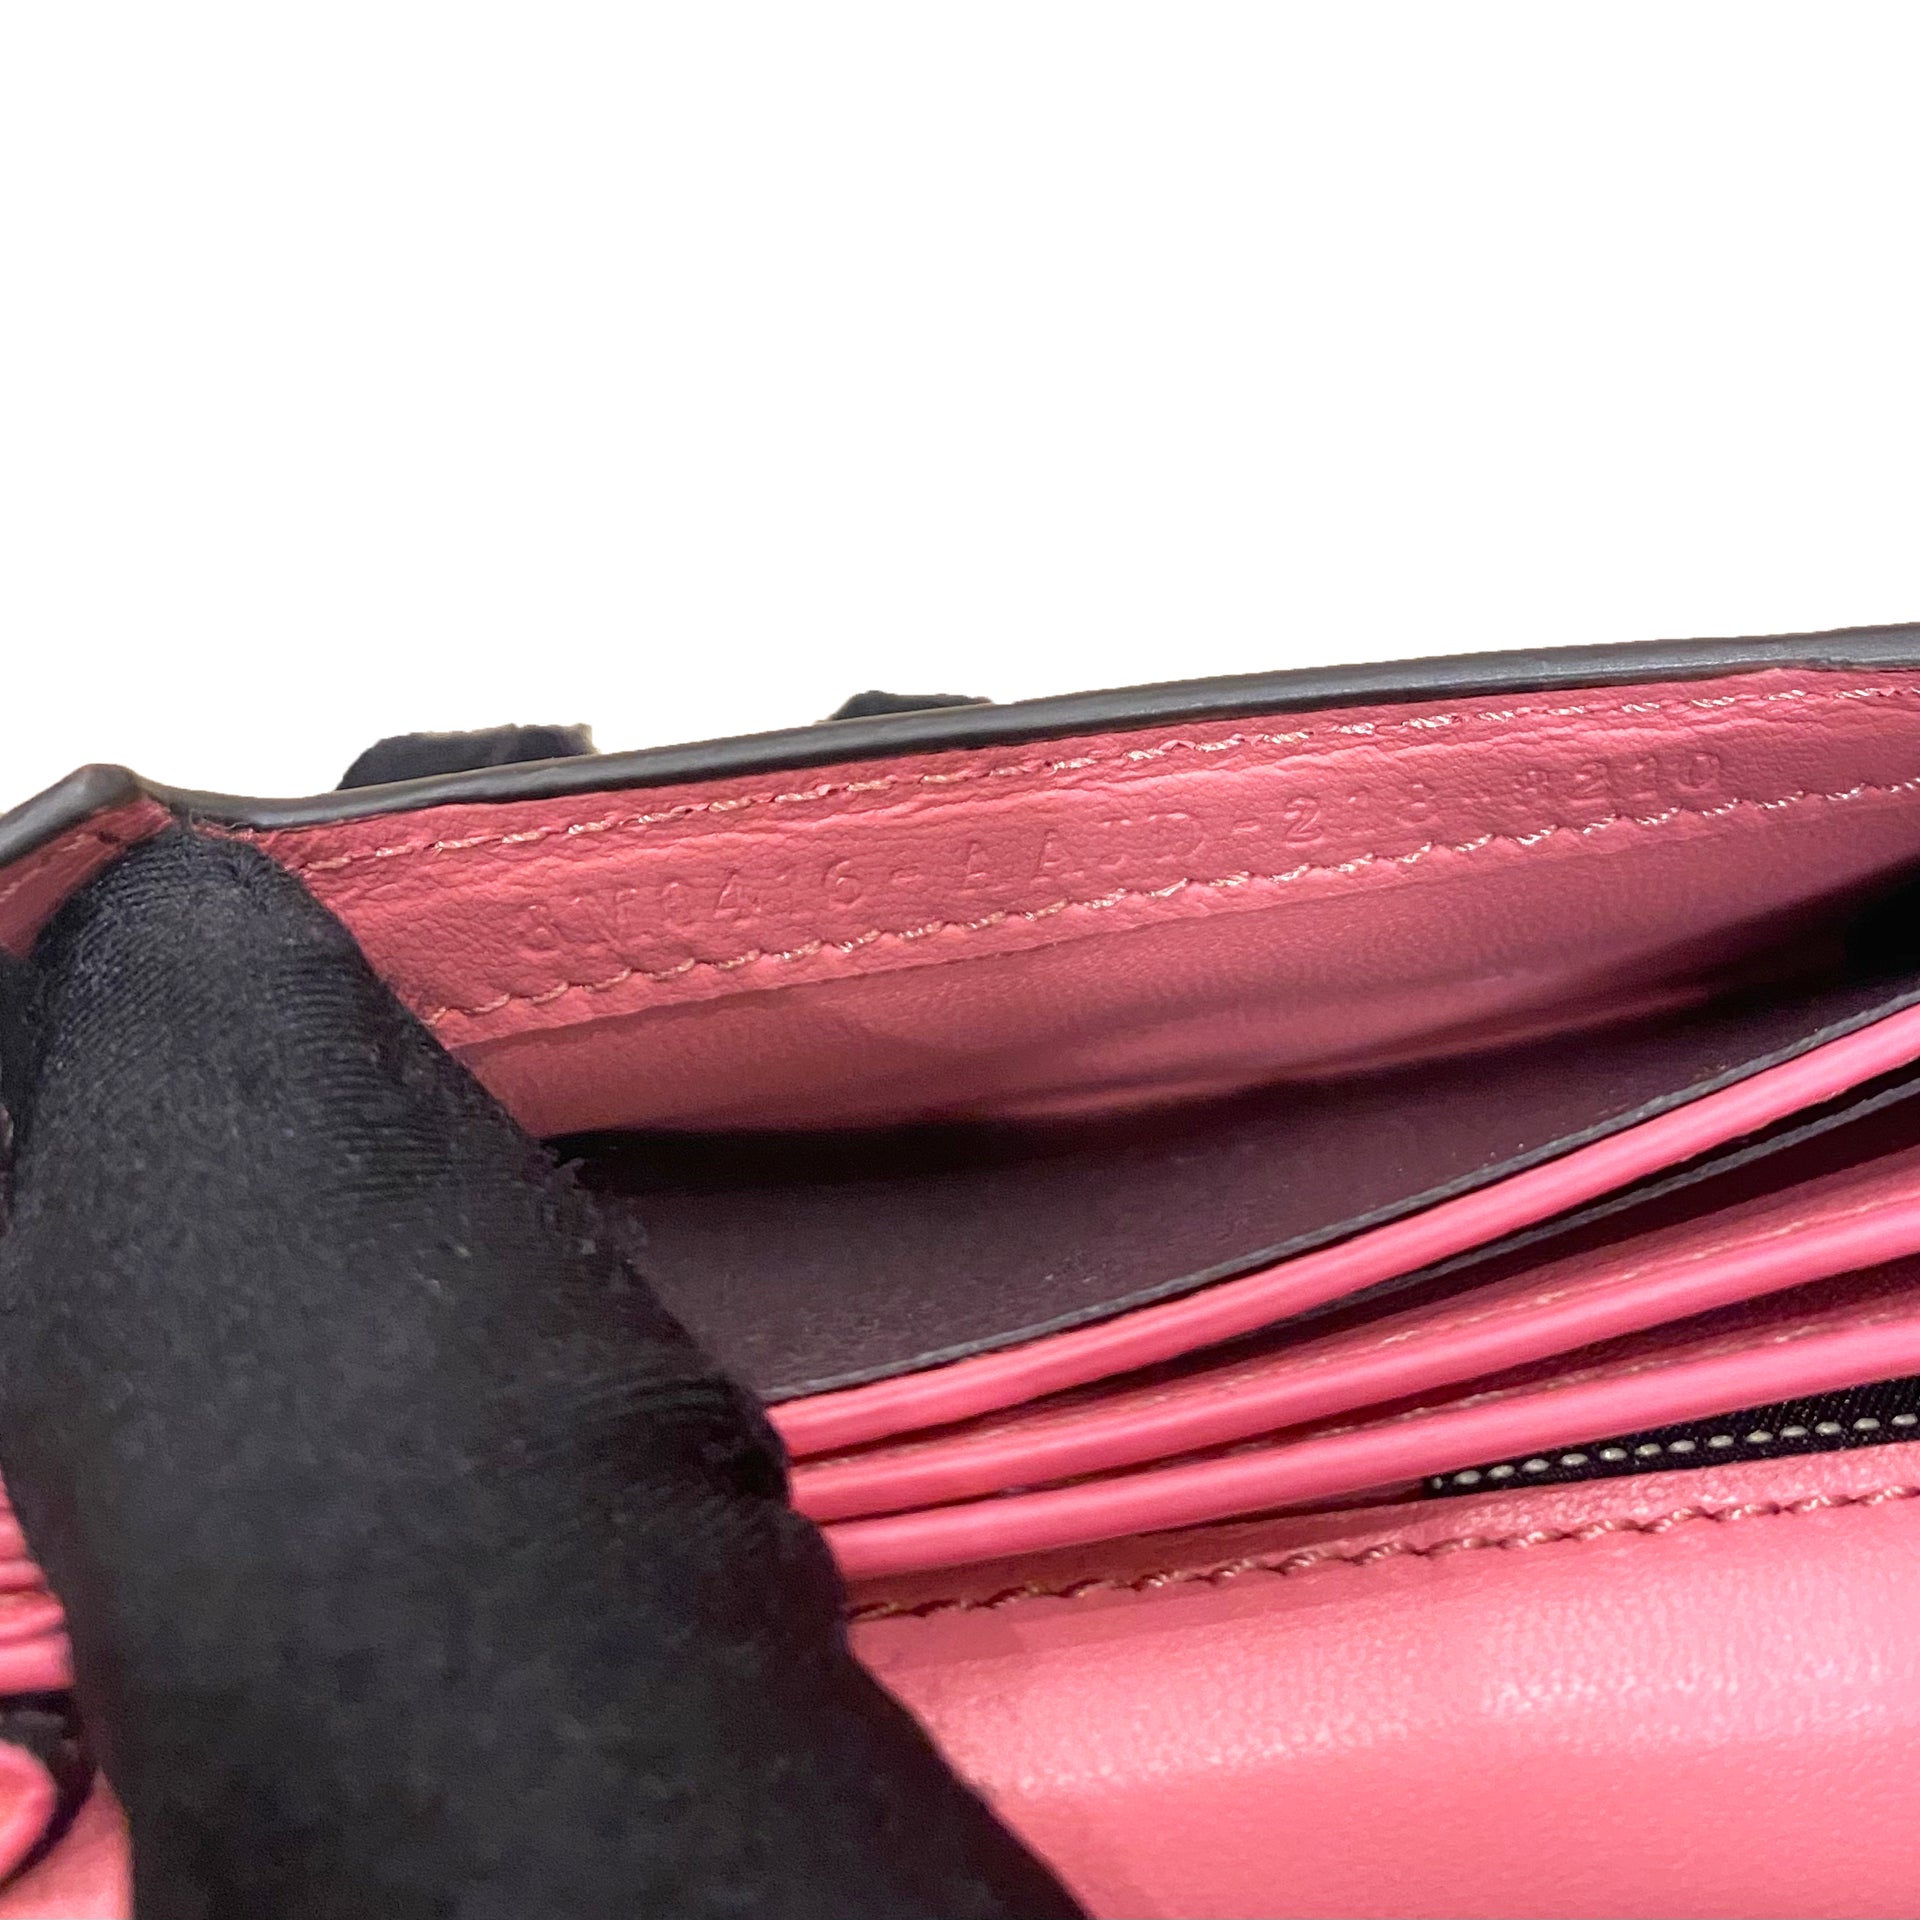 Baguette Micro Trifold - Pink FF nappa leather wallet